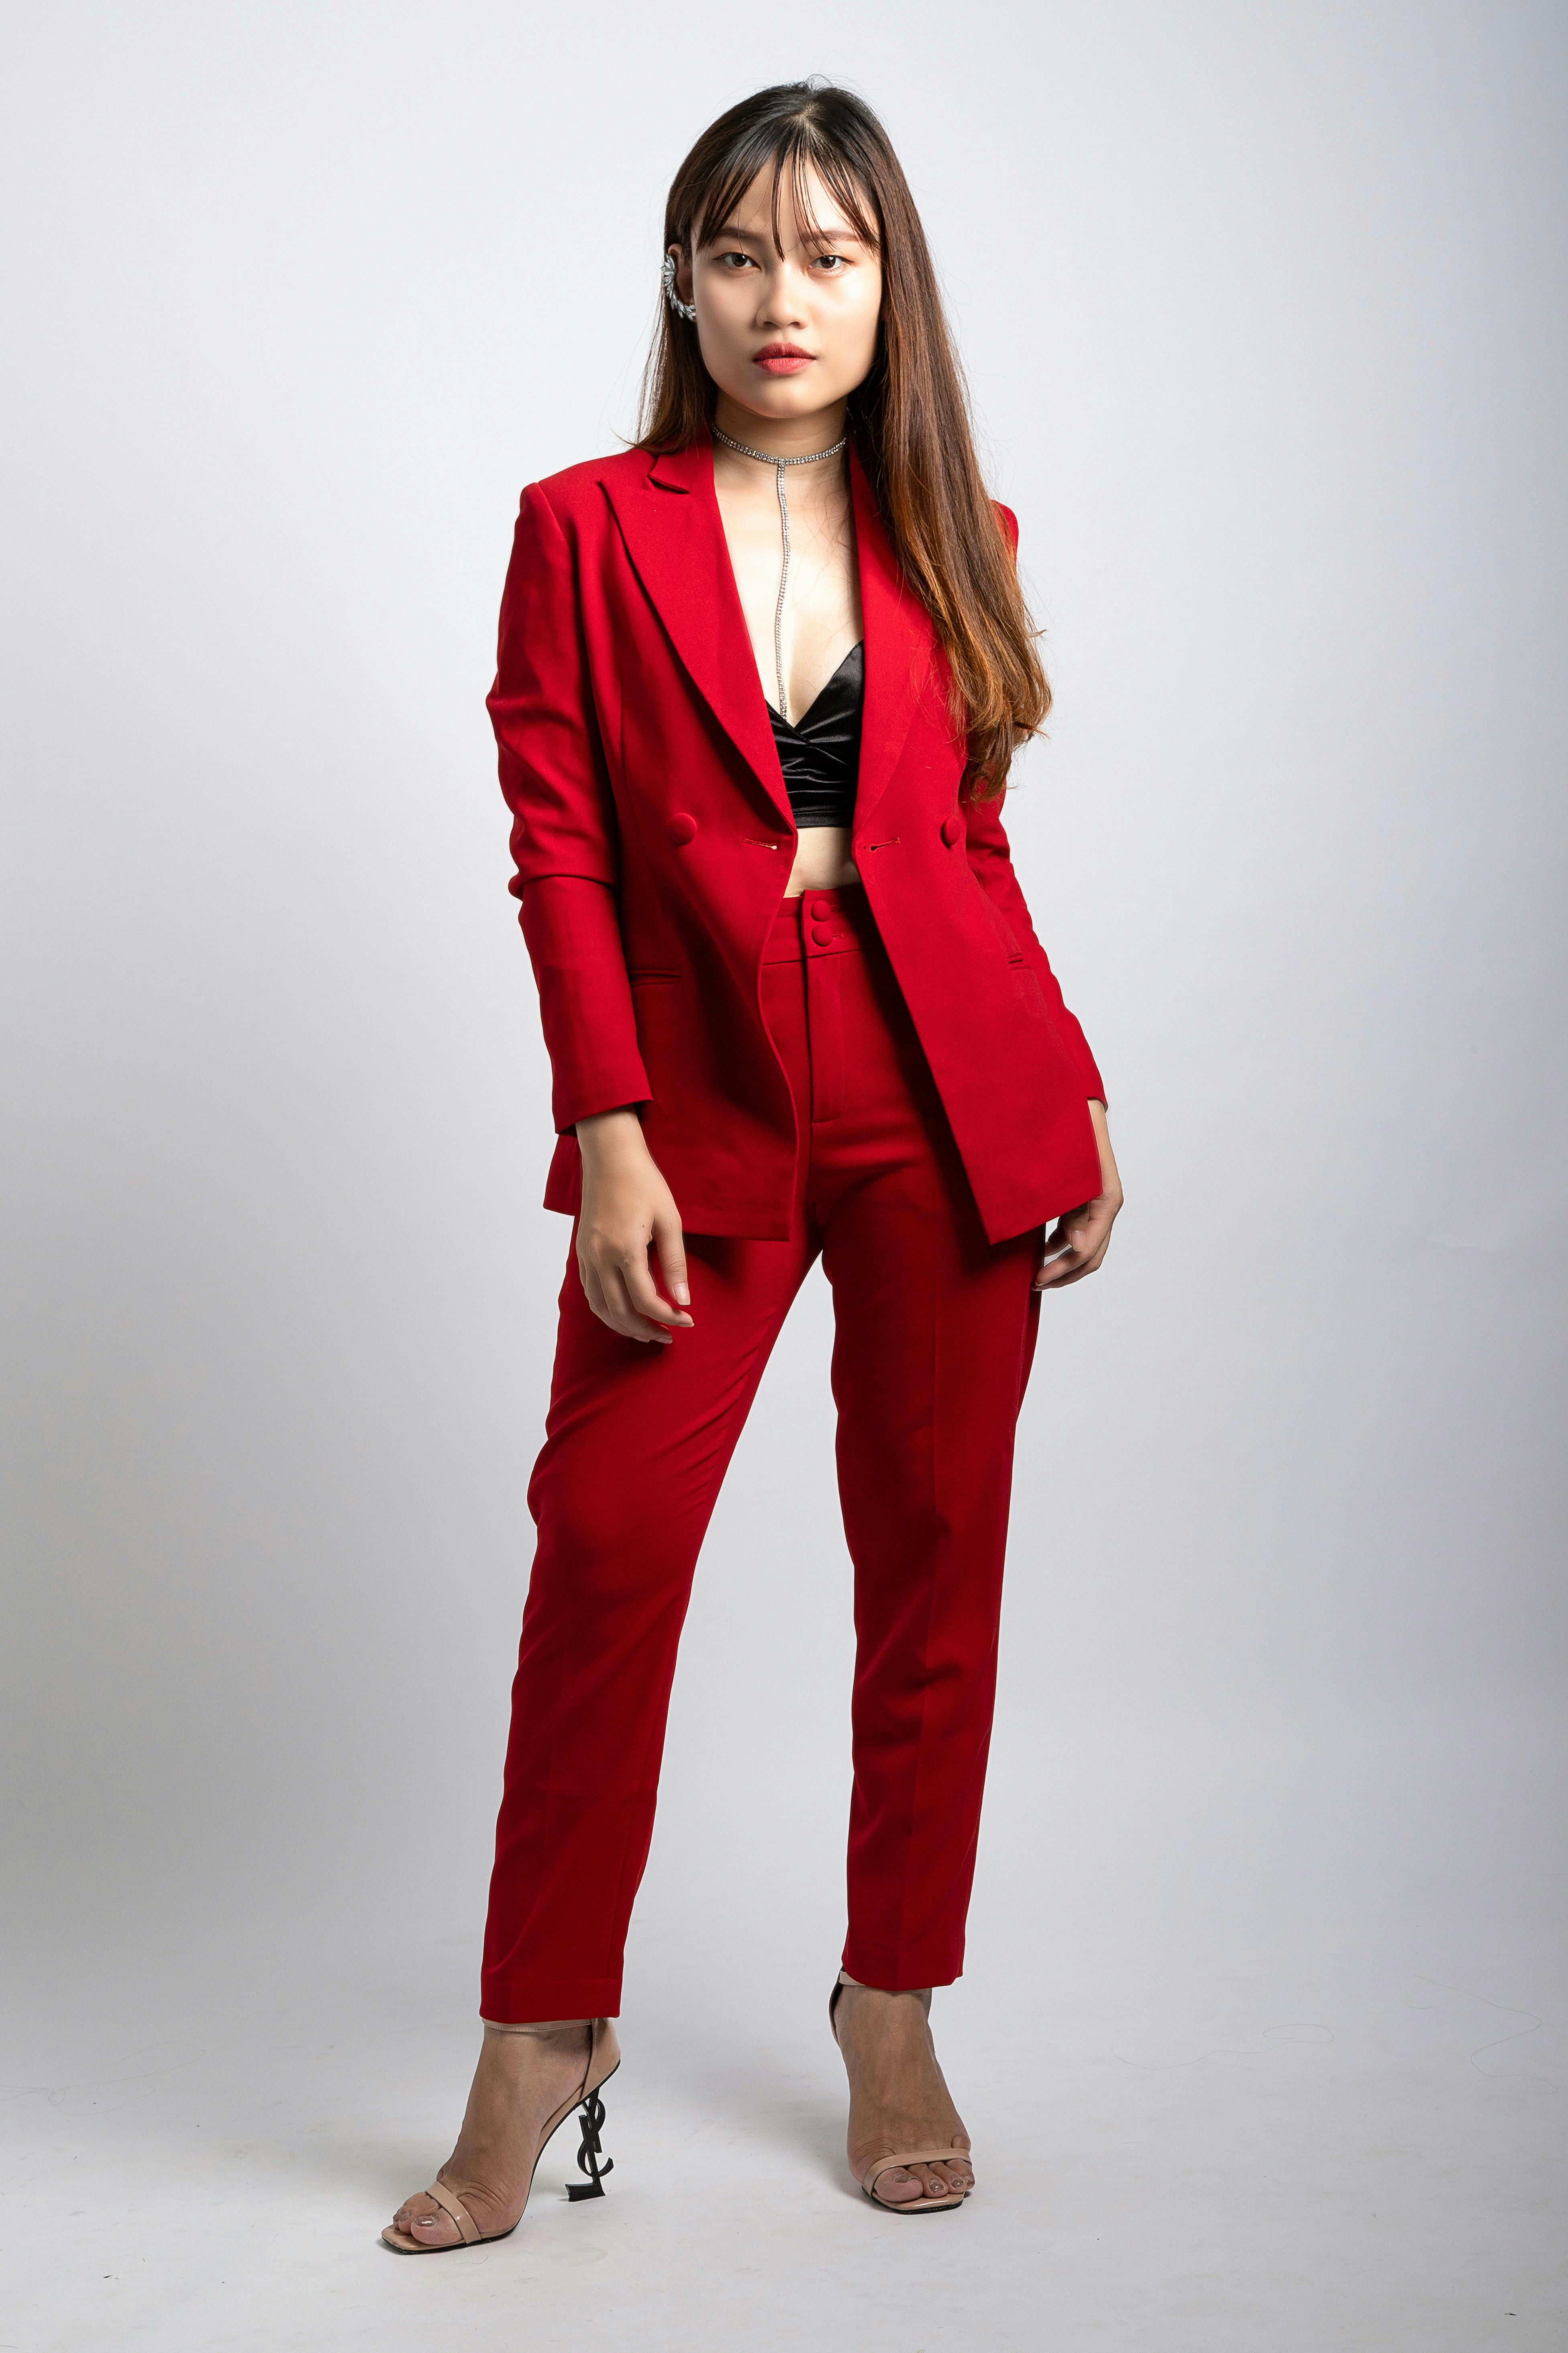 Premium Photo  Stylish woman in a beige coat and red pants